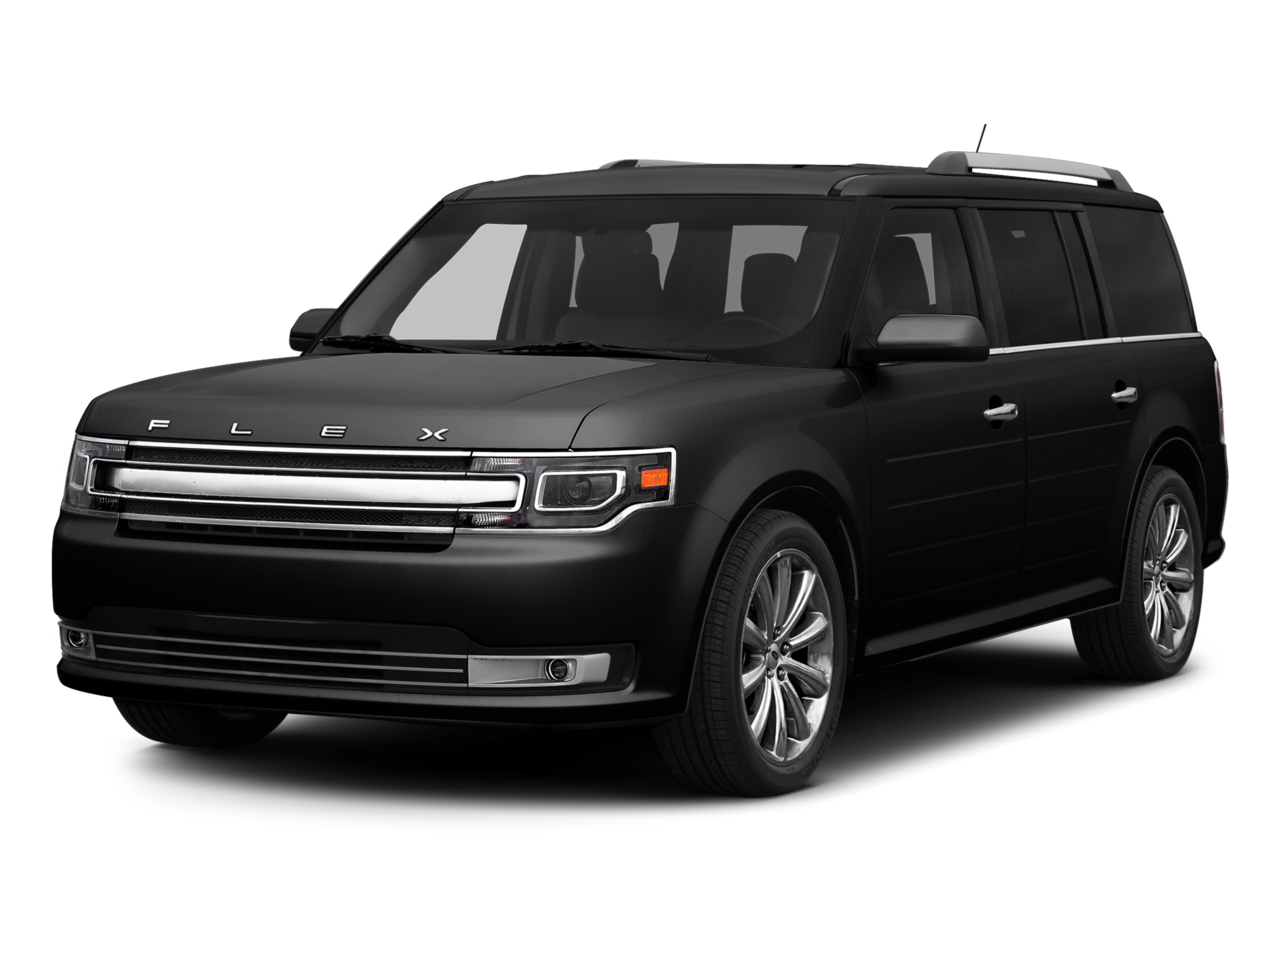 2015 Ford Flex Repair: Service and Maintenance Cost